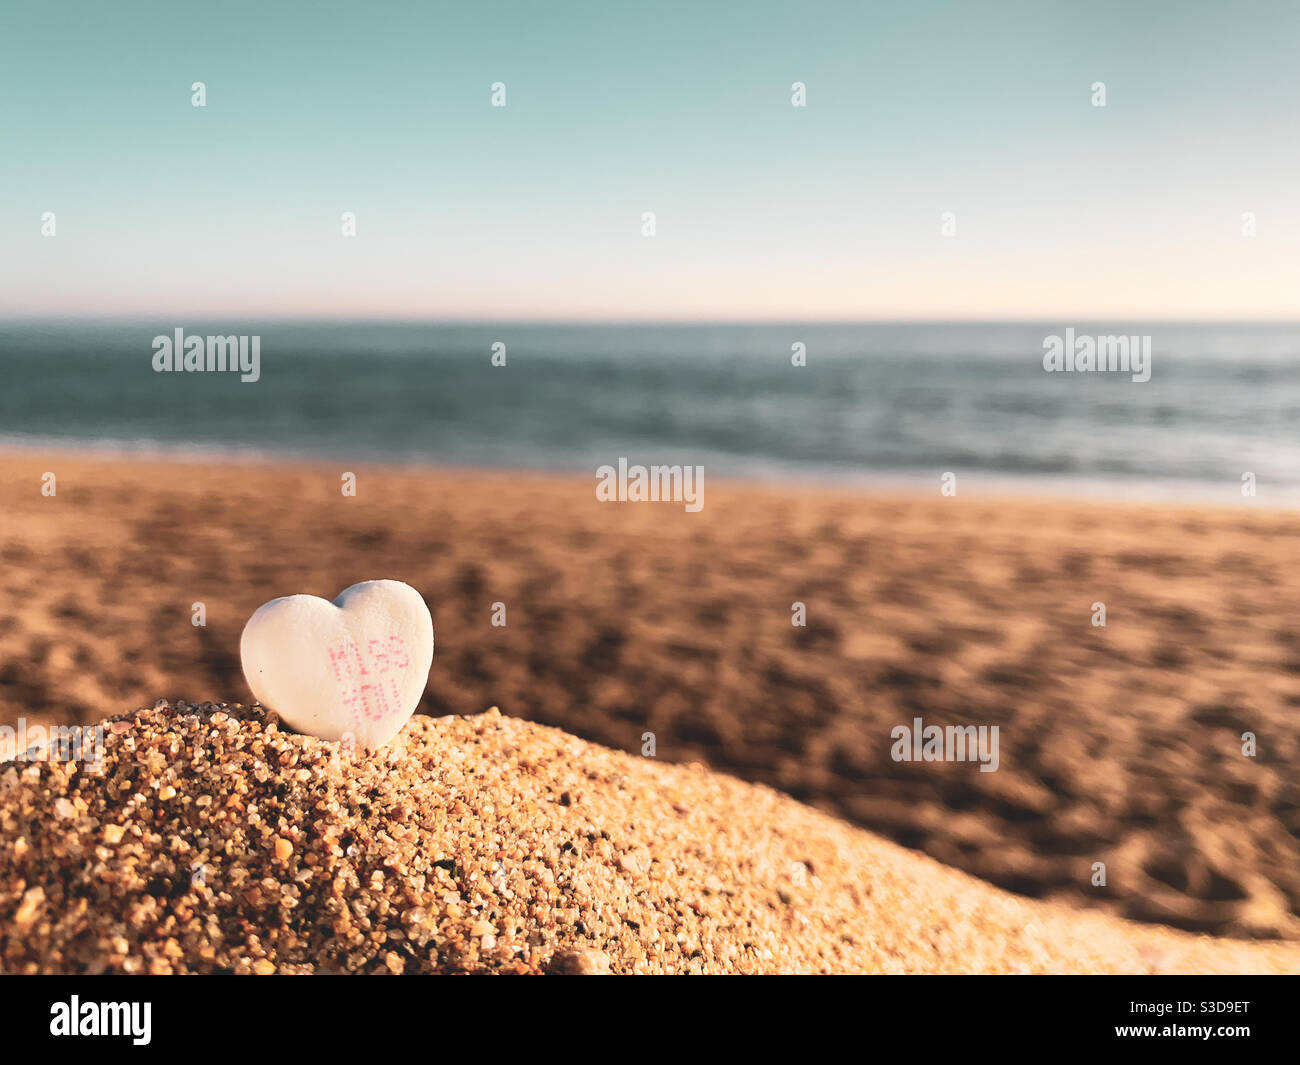 A heart shaped candy with the words “miss you” sitting in the sand on a beach in the golden hour of a beautiful sunny day, with ocean blurred in the background. Stock Photo